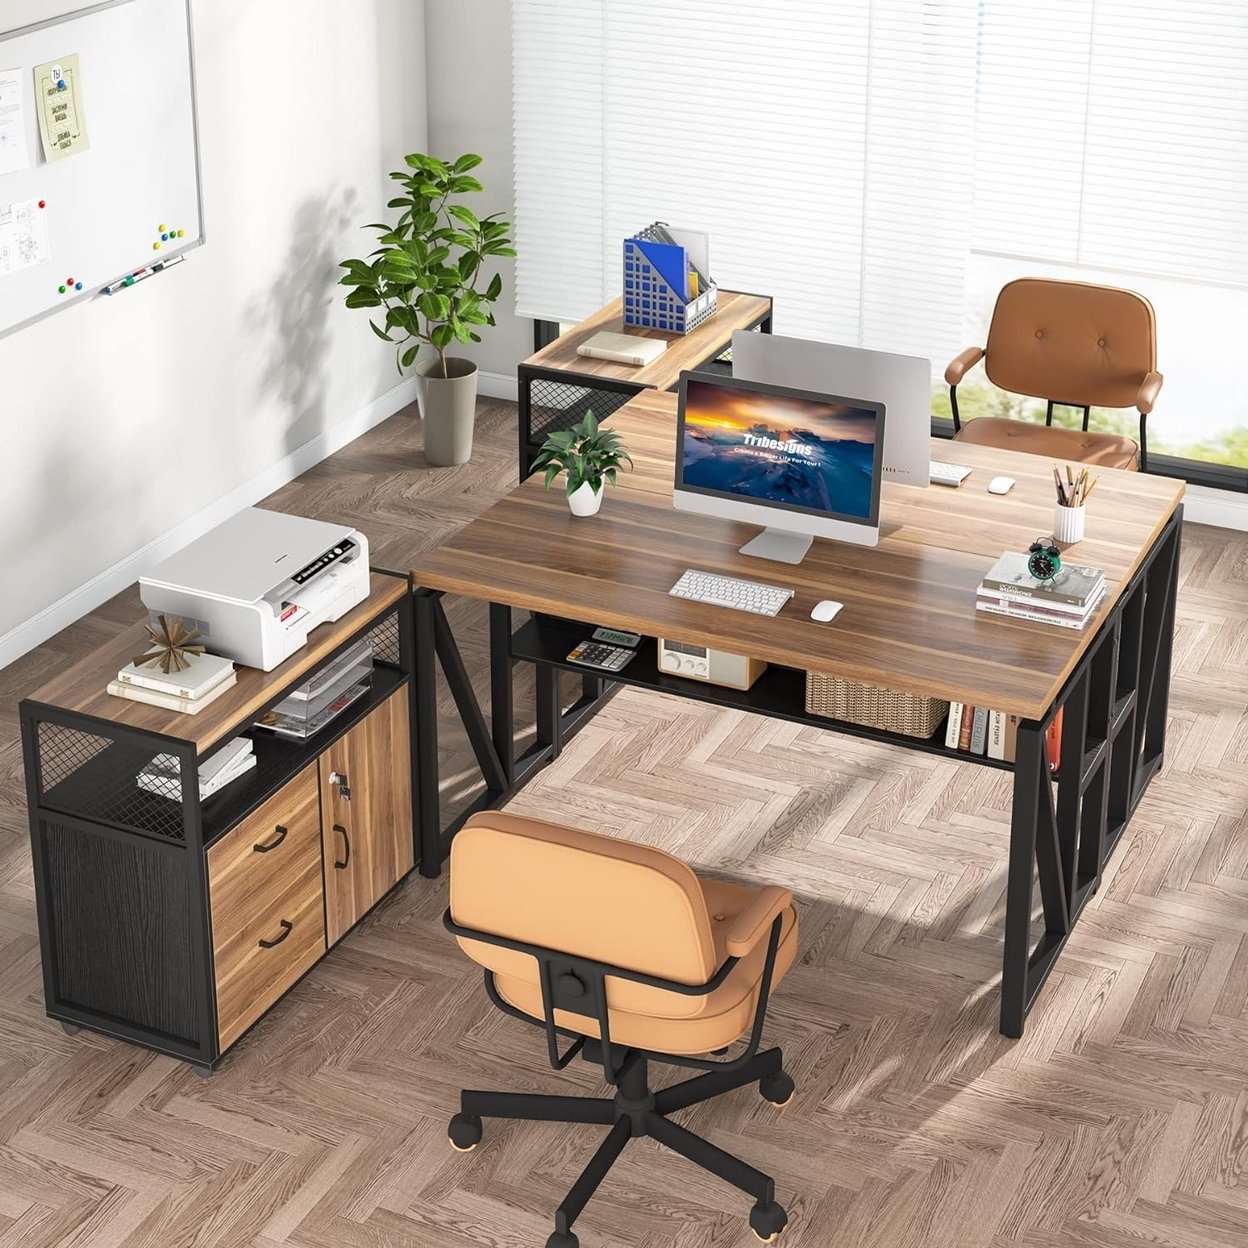 Tribesigns Office Desk With Drawers, 55 L Shaped Computer Desk With Storage Shelves And Mobile File Cabinet